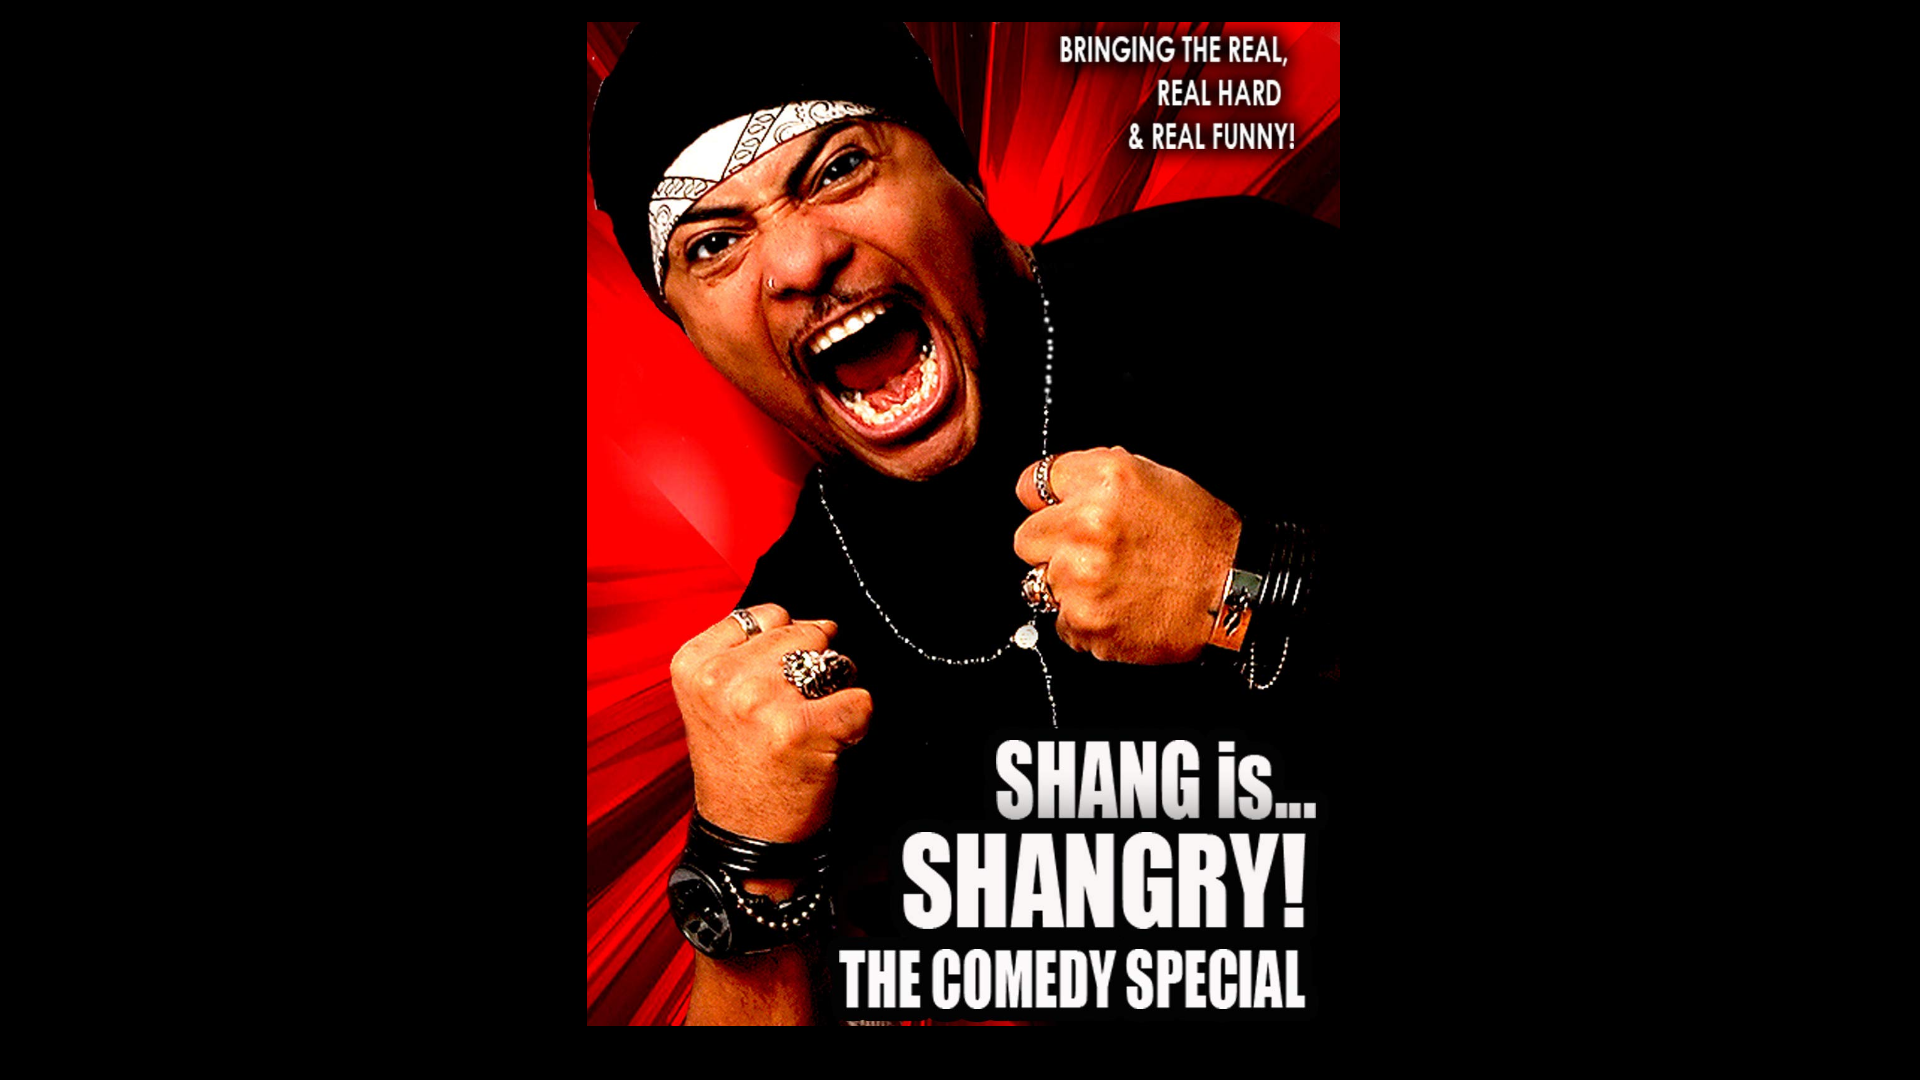 Shang is SHANGRY